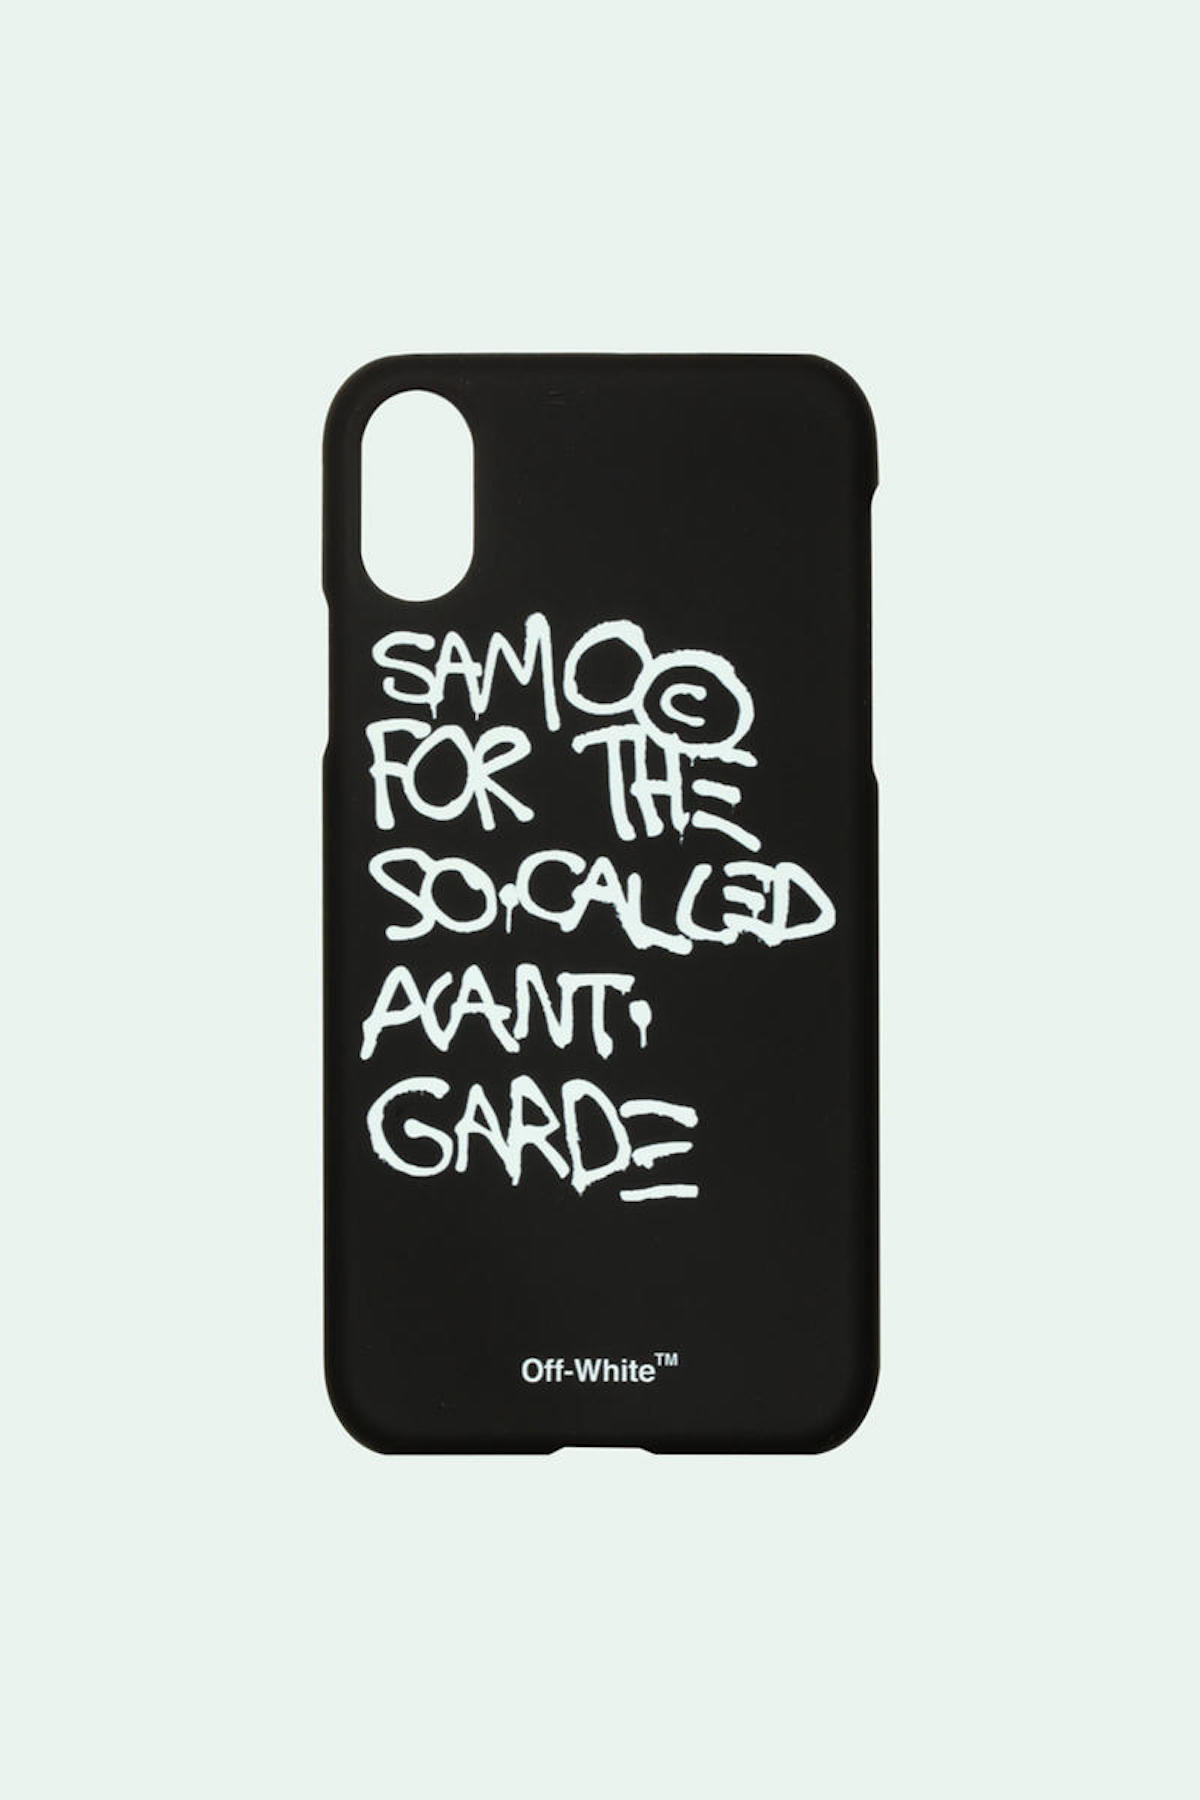 OFF-WHITE Continue Basquiat Love Affair With New iPhone Cases – PAUSE ...